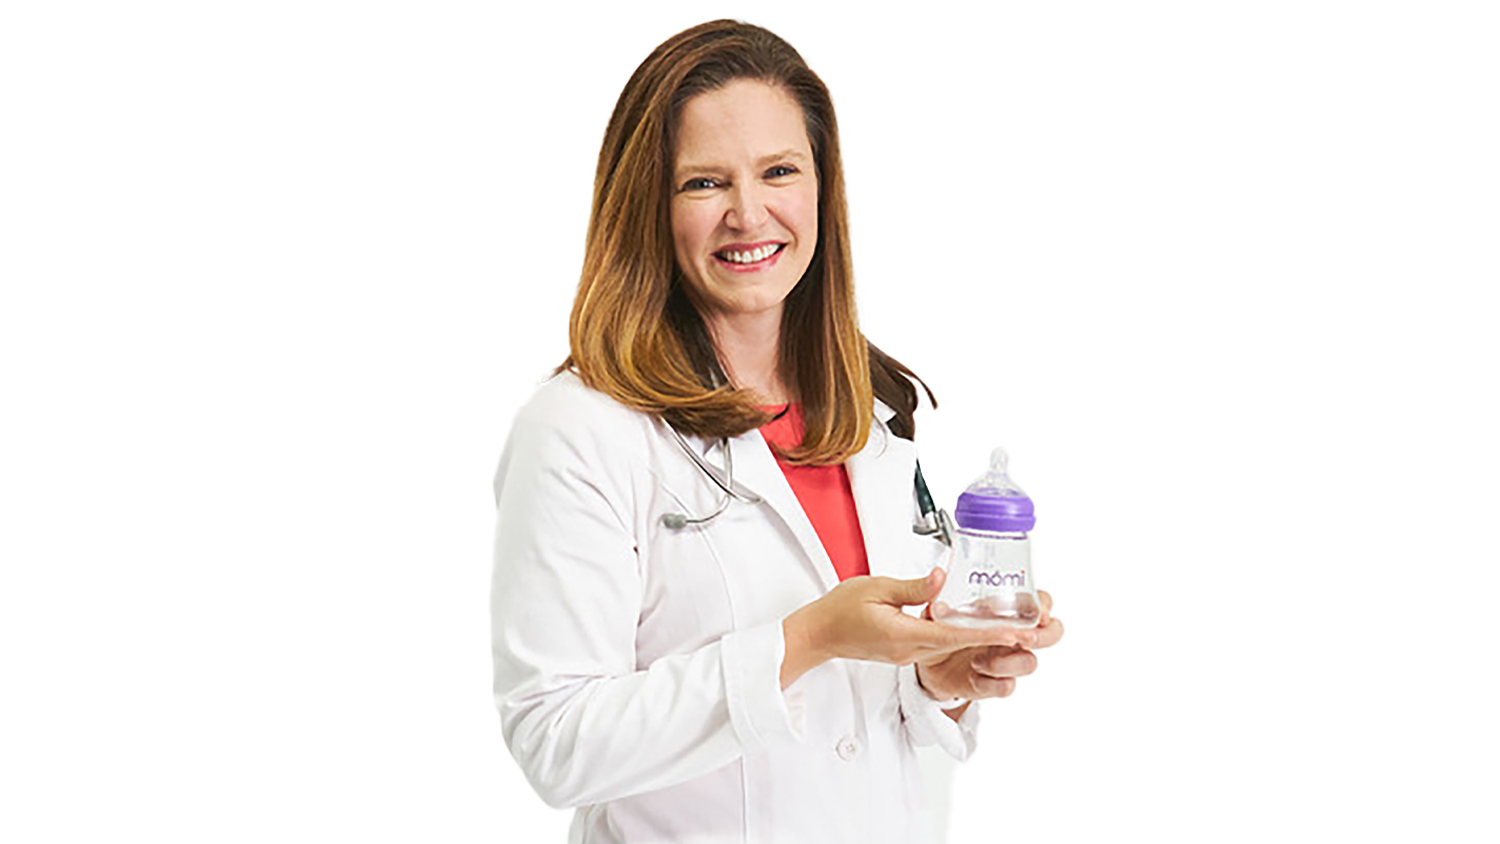 Meg Alden, dressed in a white lab coat, holds the mōmi nipple, a product she developed to assist mothers with bottle-feeding.